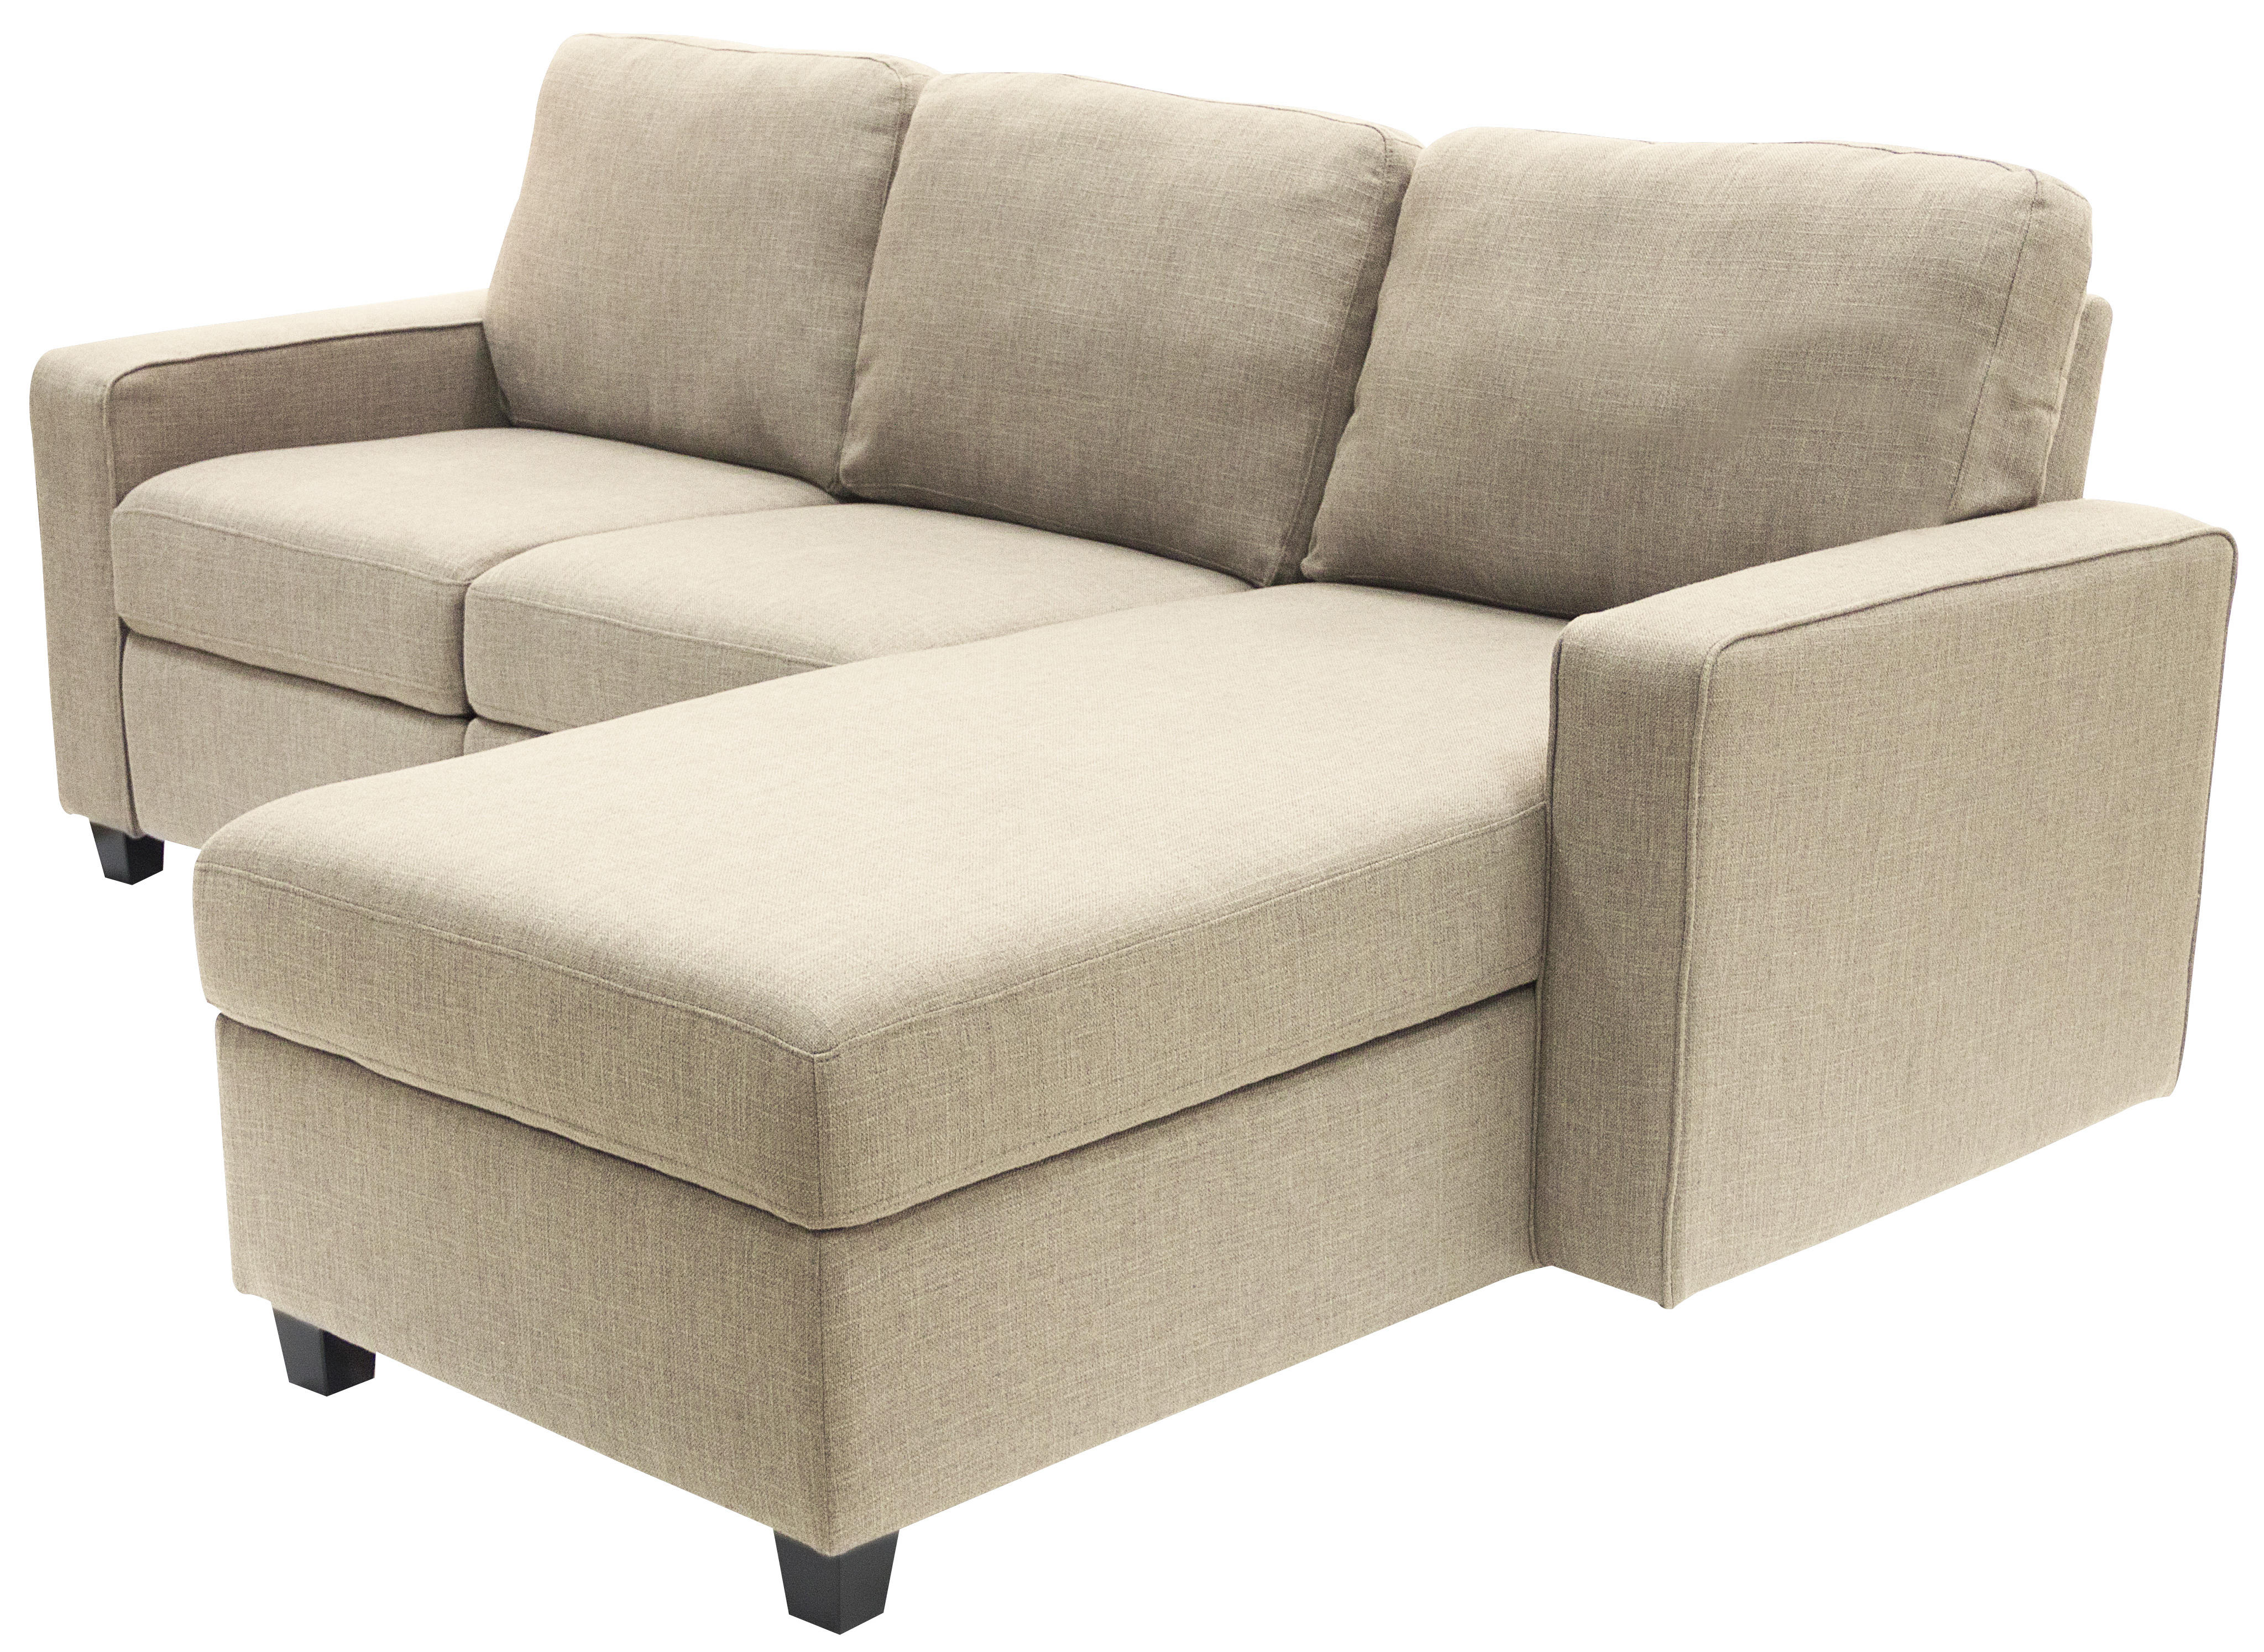 Serta Palisades Reclining Sectional with Right Storage Chaise - Oatmeal - image 5 of 9